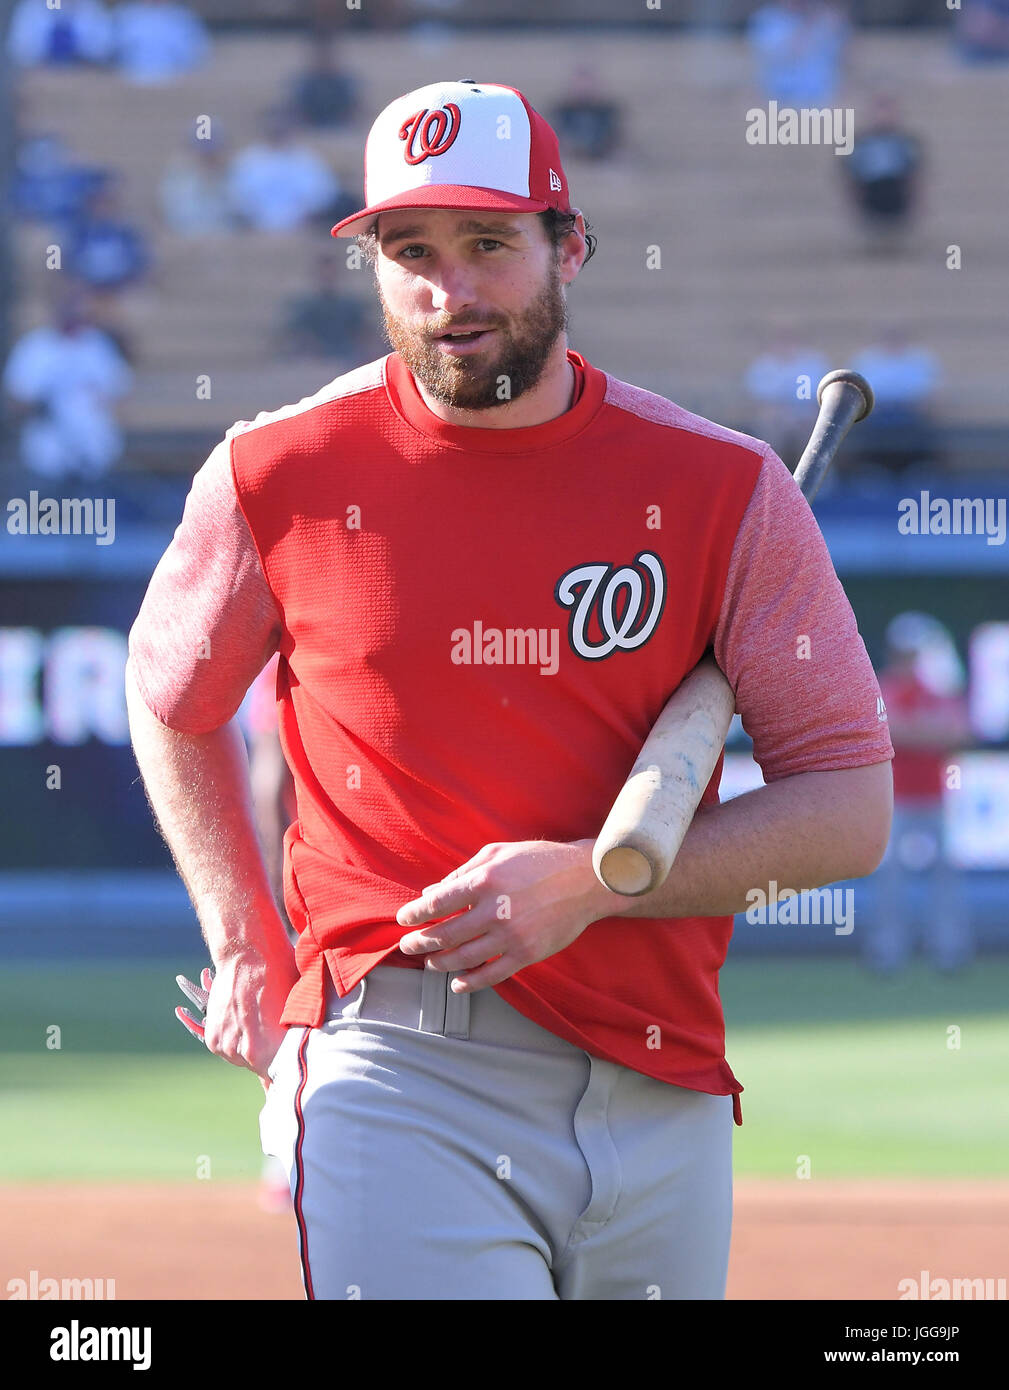 Los Angeles, California, USA. 5th June, 2017. Daniel Murphy (Nationals) MLB  : Daniel Murphy of the Washington Nationals before the Major League  Baseball game against the Los Angeles Dodgers at Dodger Stadium